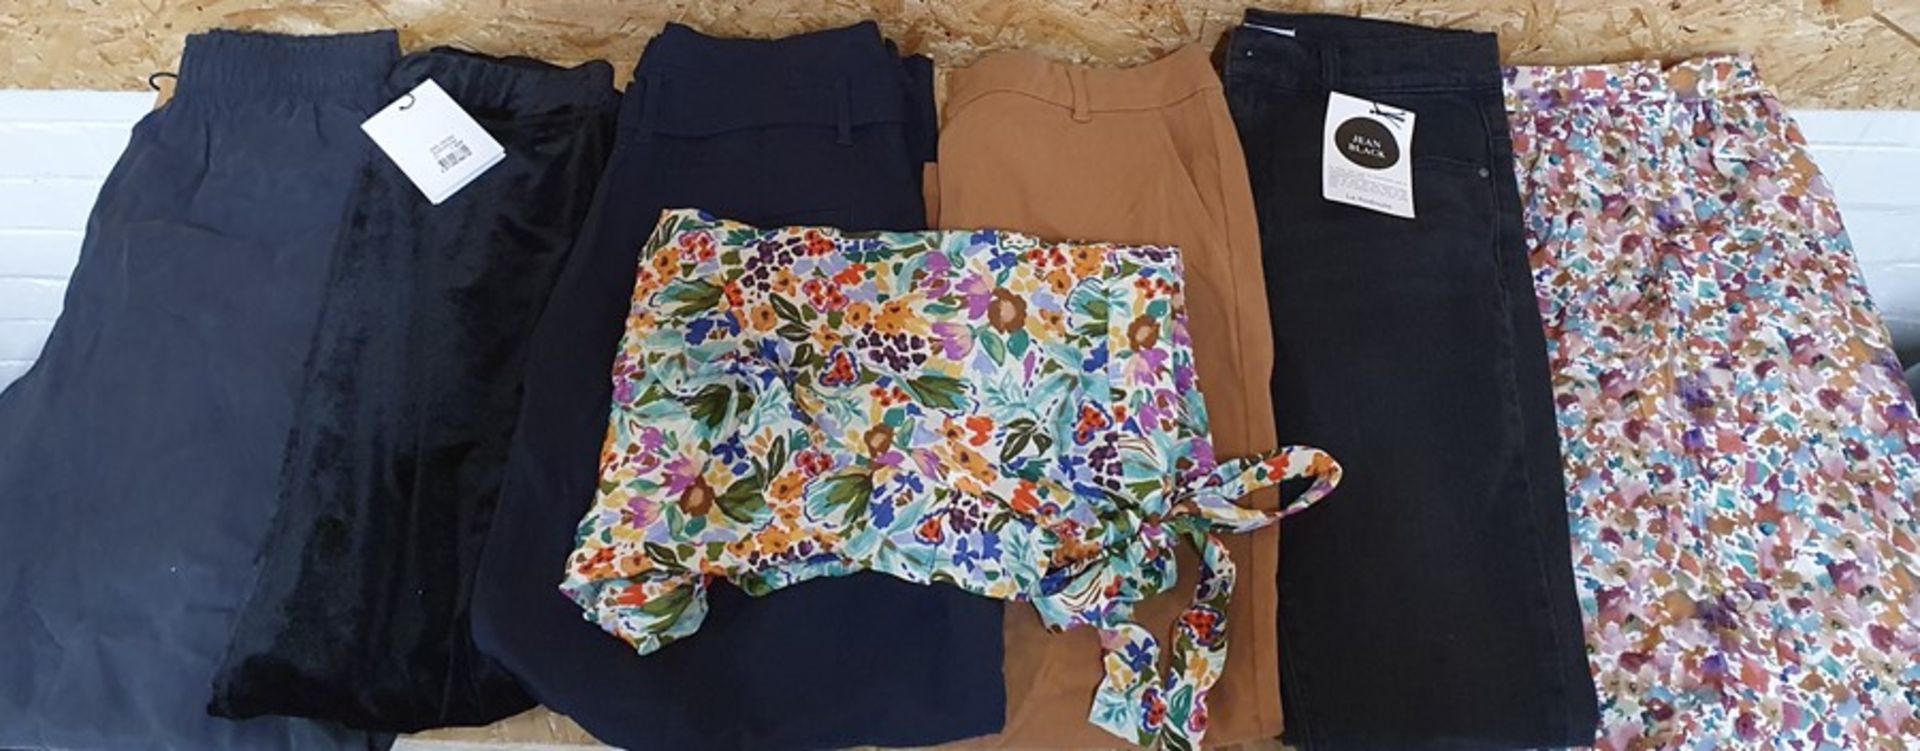 ONE LOT TO CONTAIN LADIES TROUSERS / SKIRTS / SHORTS - APPROX 10 ITEMS. SIZES, STYLES AND COLOURS